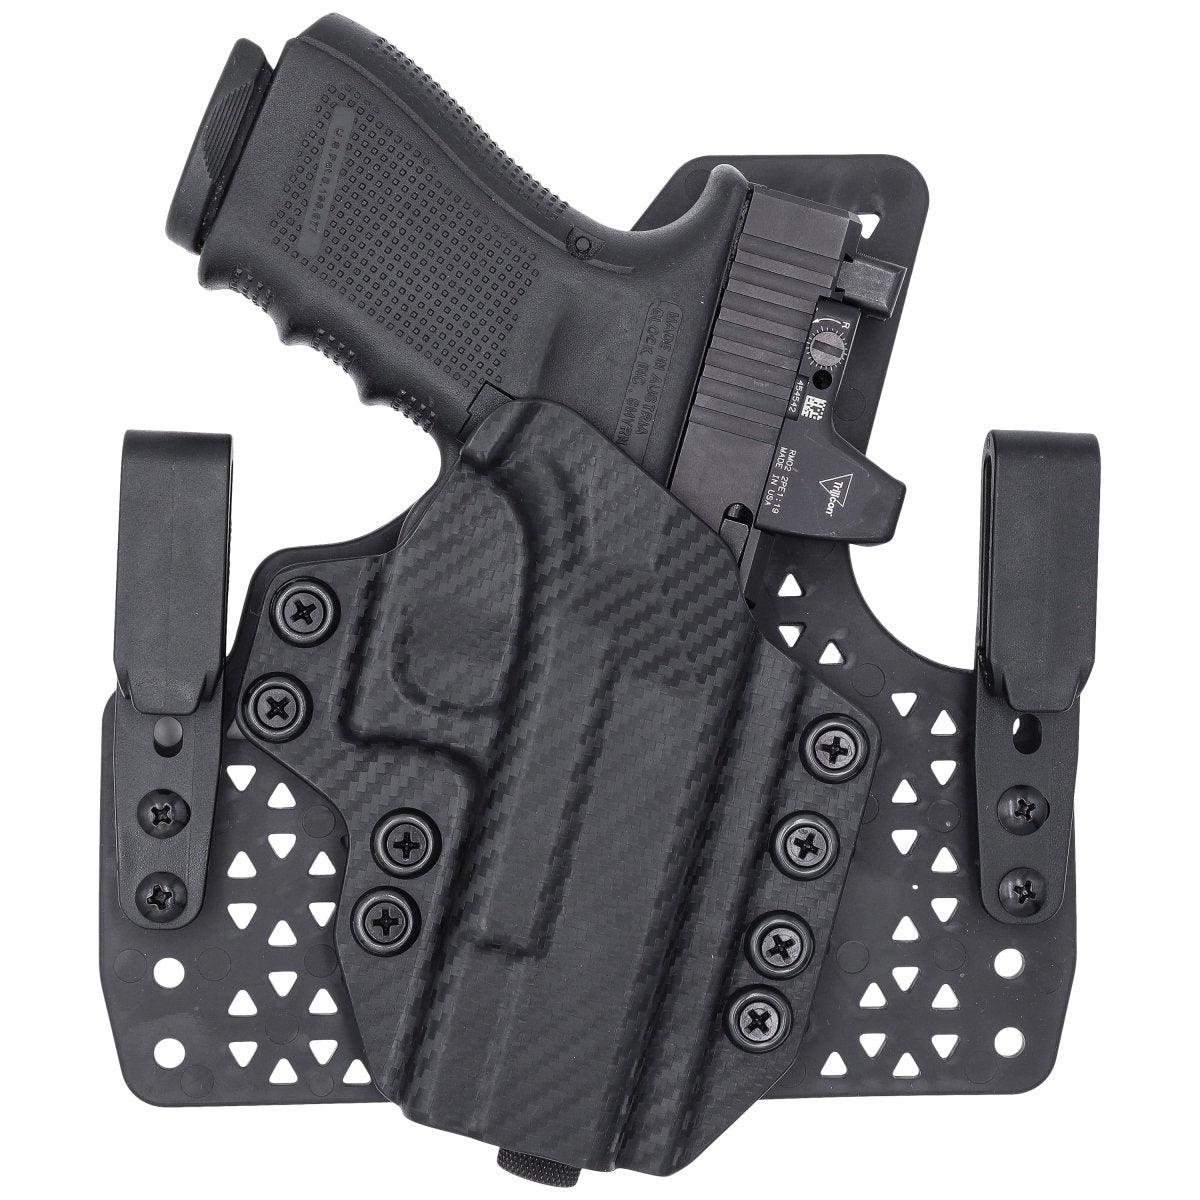 Wide KYDEX Armalloy™ Hybrid Holsters